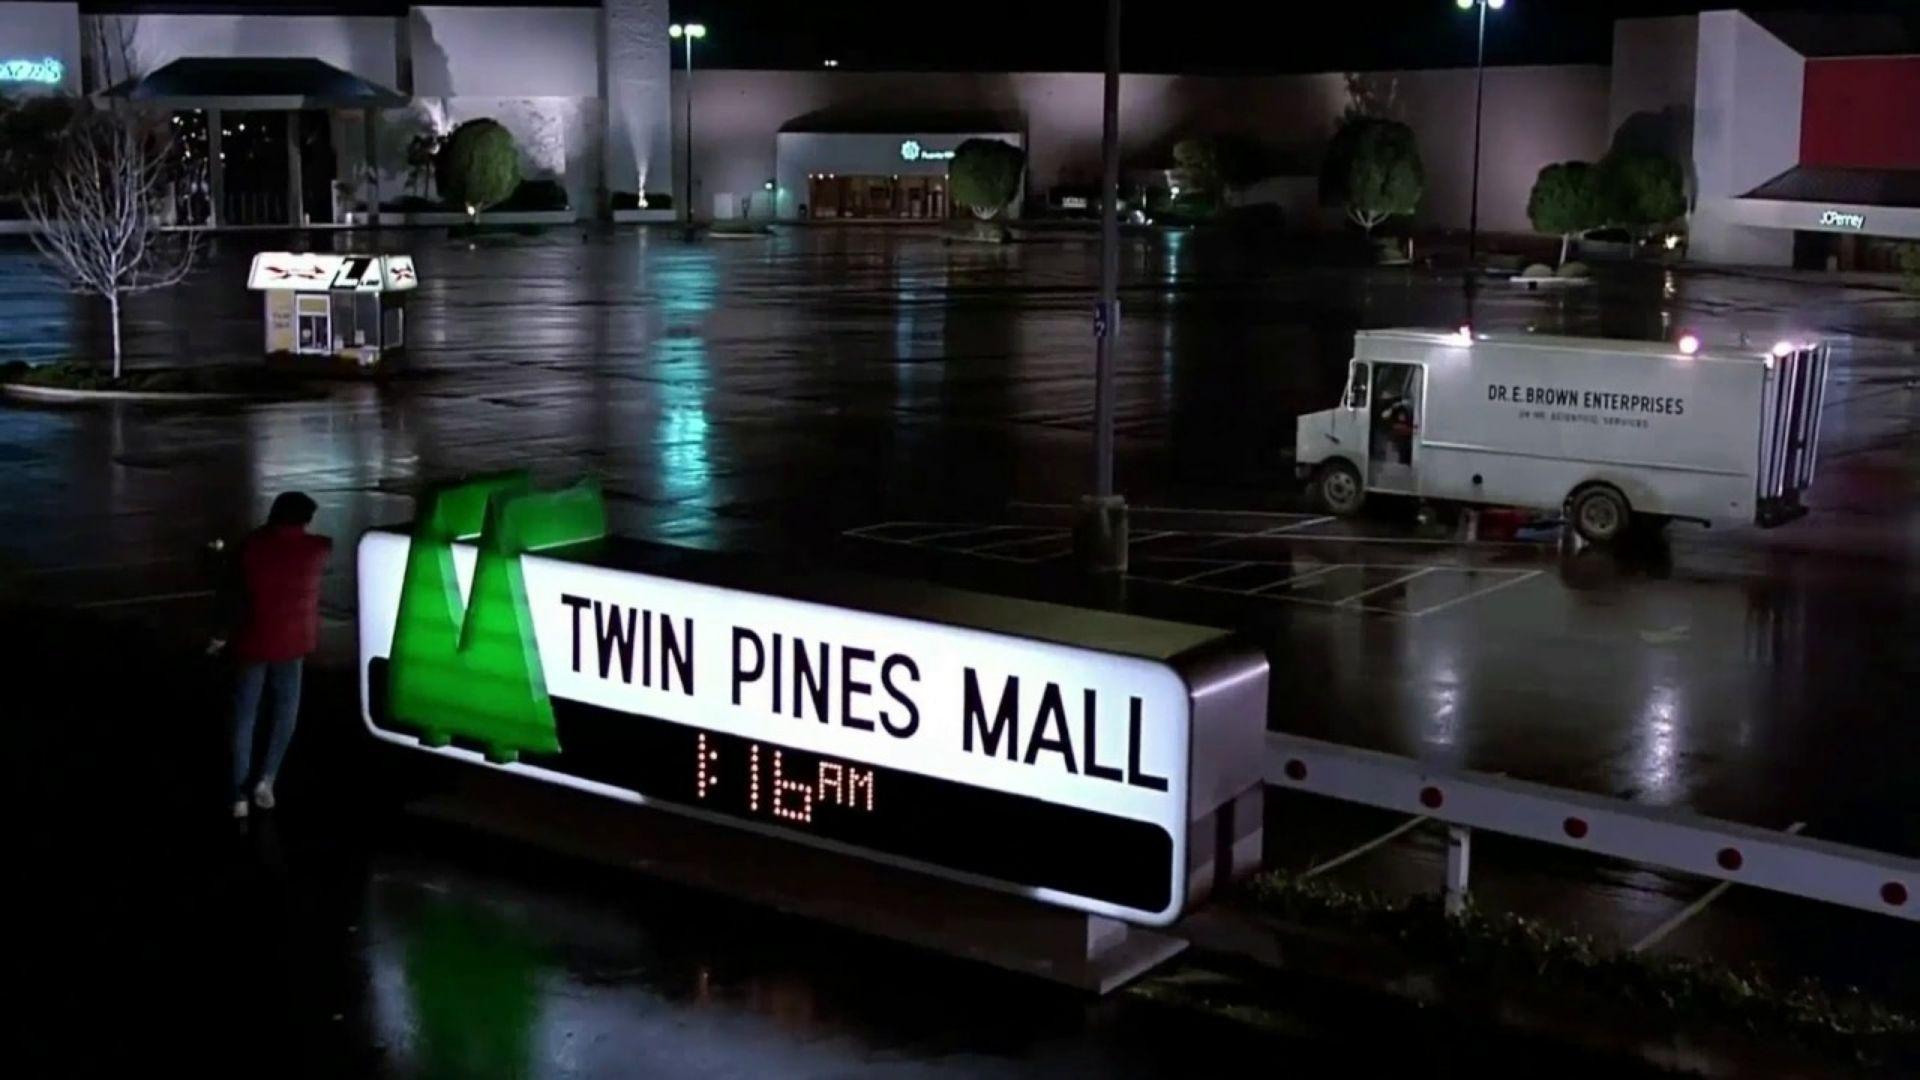 twin pines mall in Back to the future